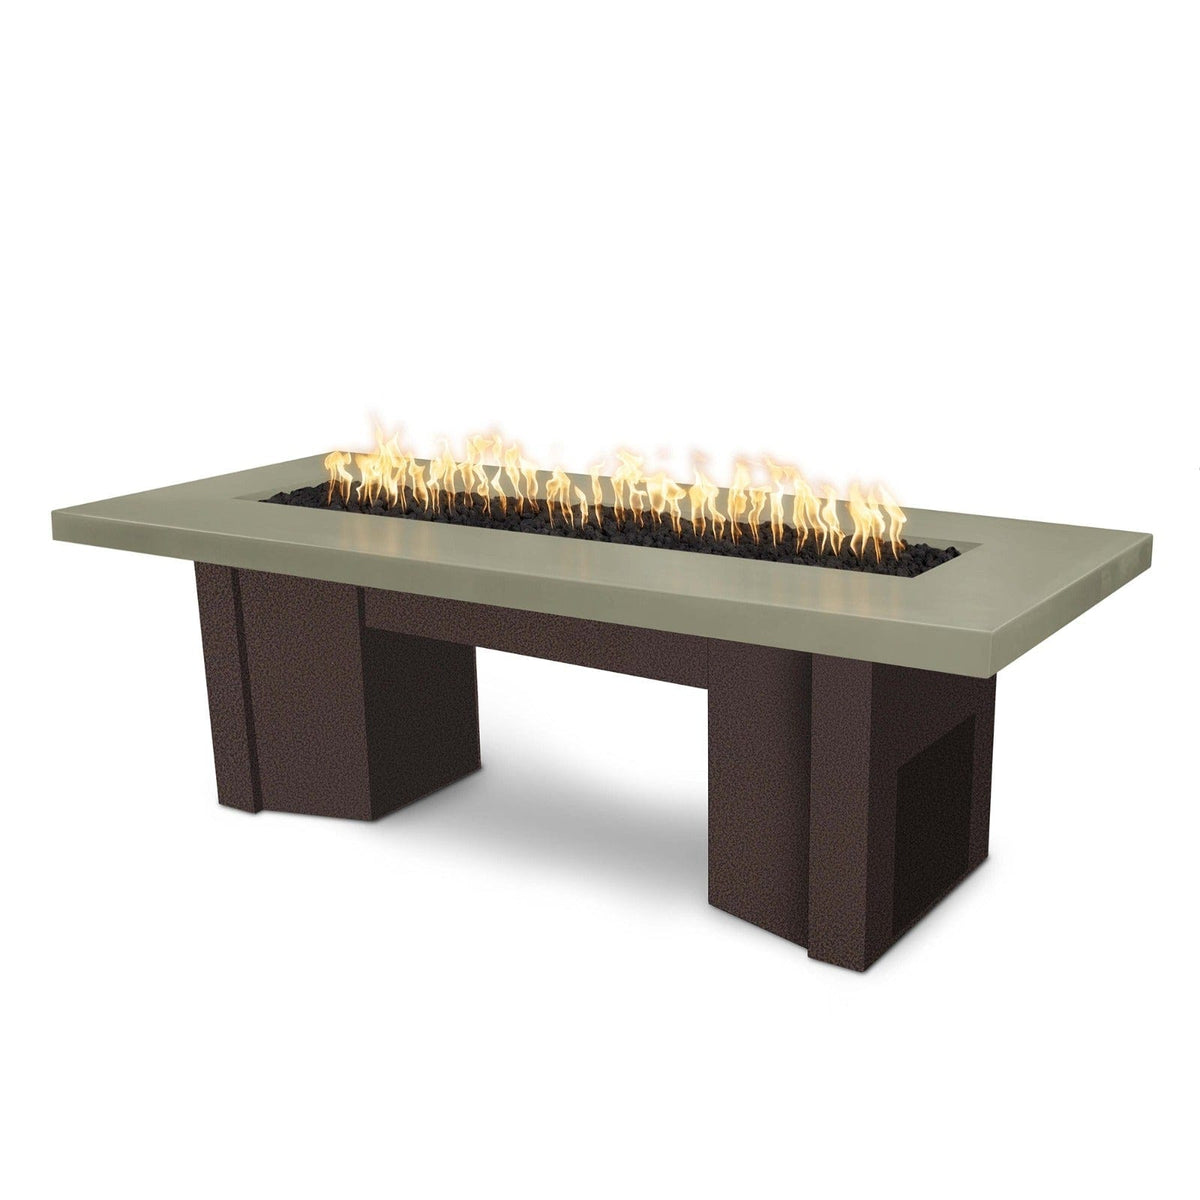 The Outdoor Plus Fire Features Ash (-ASH) / Copper Vein Powder Coated Steel (-CPV) The Outdoor Plus 78&quot; Alameda Fire Table Smooth Concrete in Natural Gas - Flame Sense System with Push Button Spark Igniter / OPT-ALMGFRC78FSEN-NG